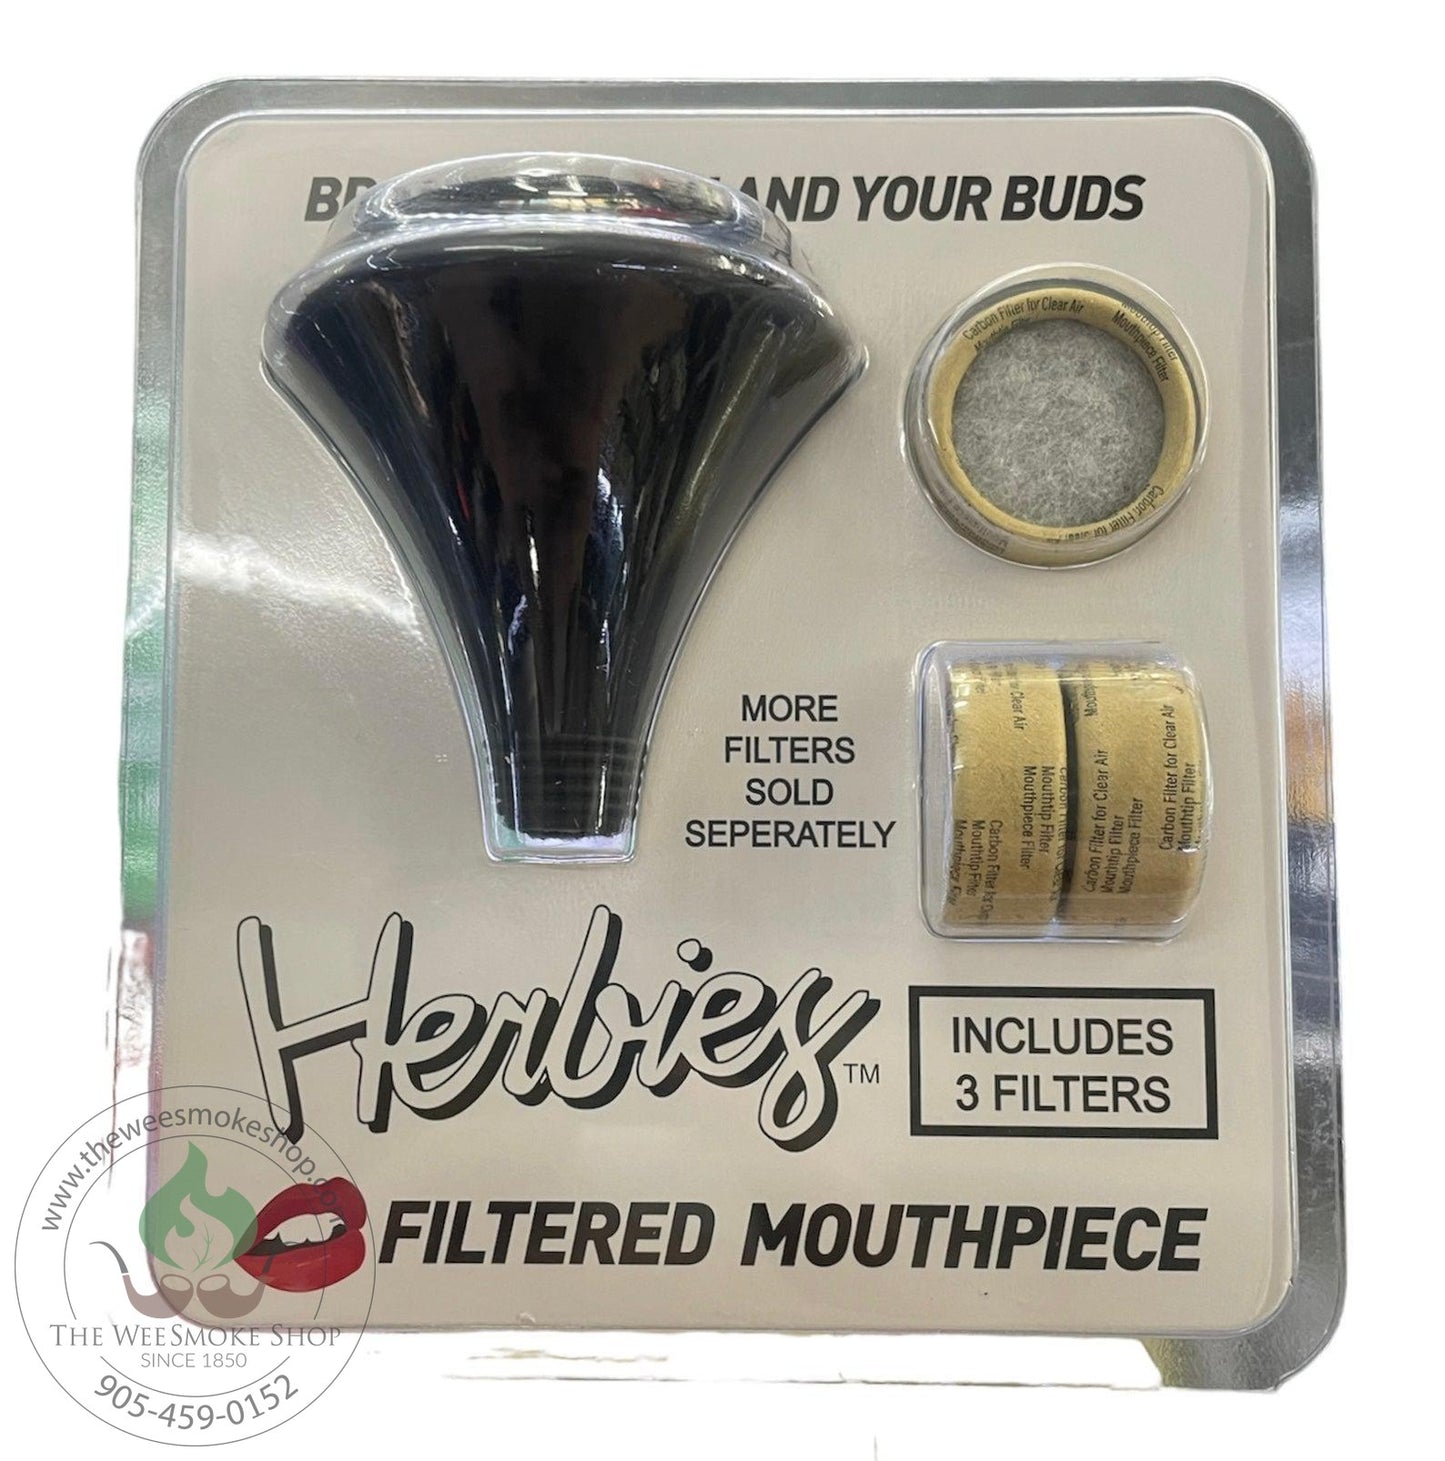 Herbies Filtered Mouthpiece - Black - The Wee Smoke Shop